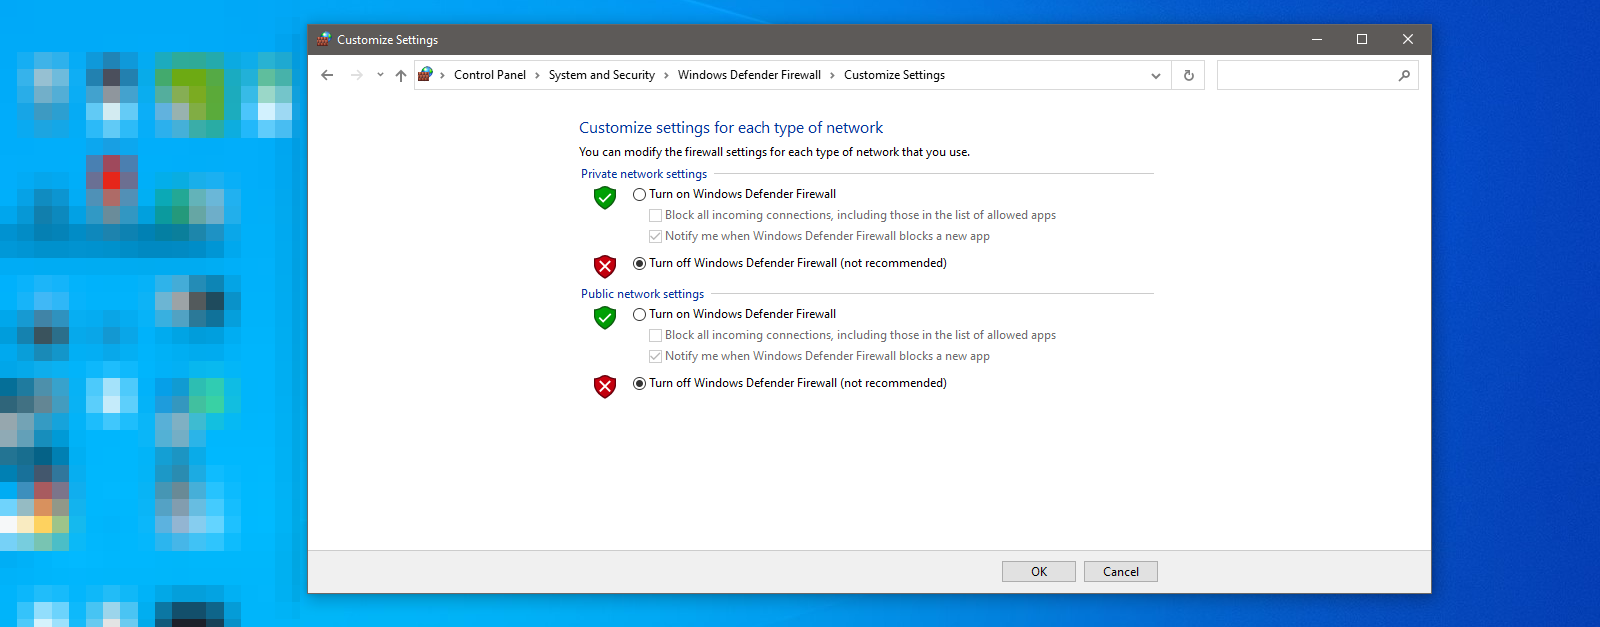 Turning-Off-Windows-Defender-Firewall-For-Private-And-Public-Network-Settings-In-Windows-10